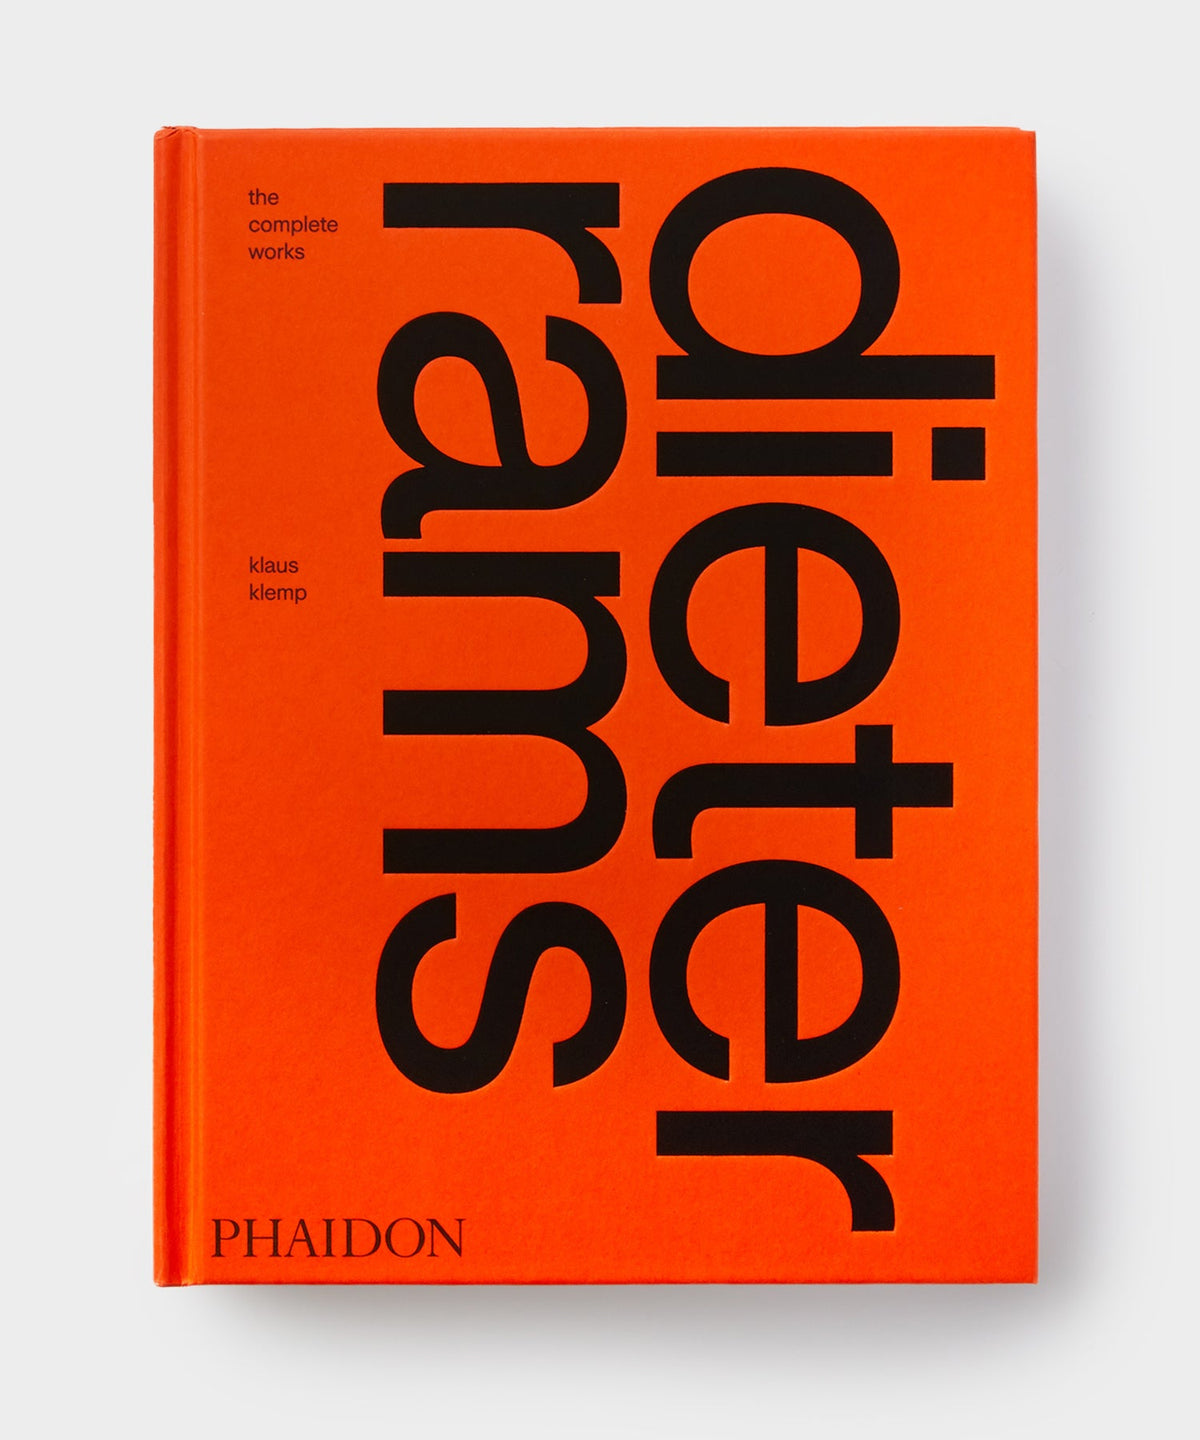 Phaidon " Dieter Rams: The Complete Works  by Klaus Klemp "